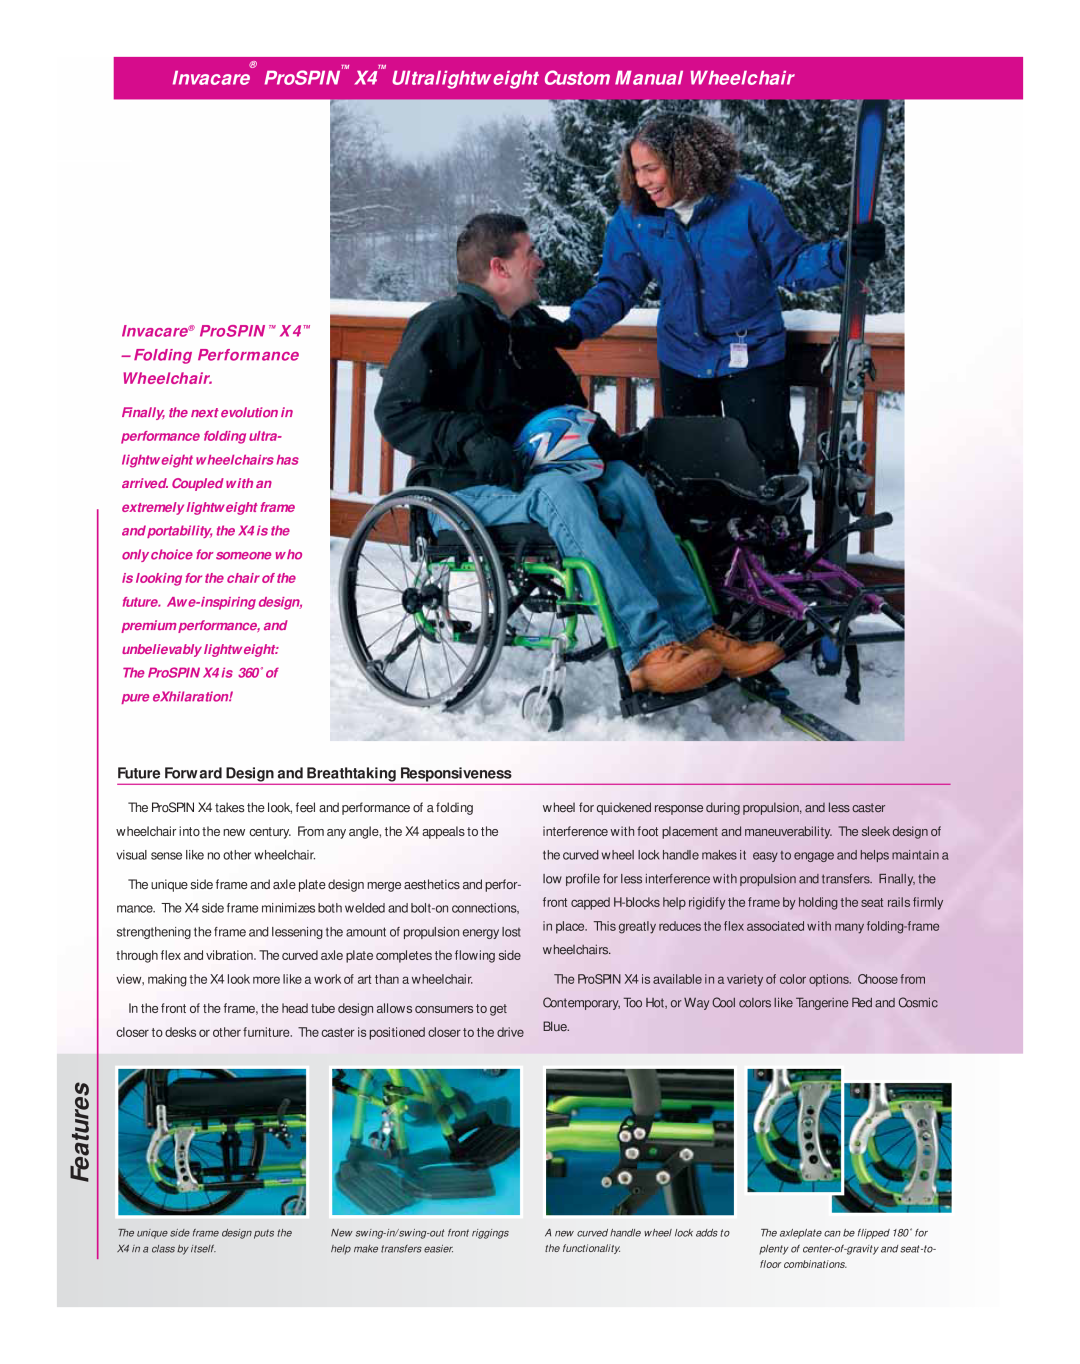 Invacare Invacare ProSPIN X4 Ultralightweight Custom Manual Wheelchair, help make transfers easier, the functionality 